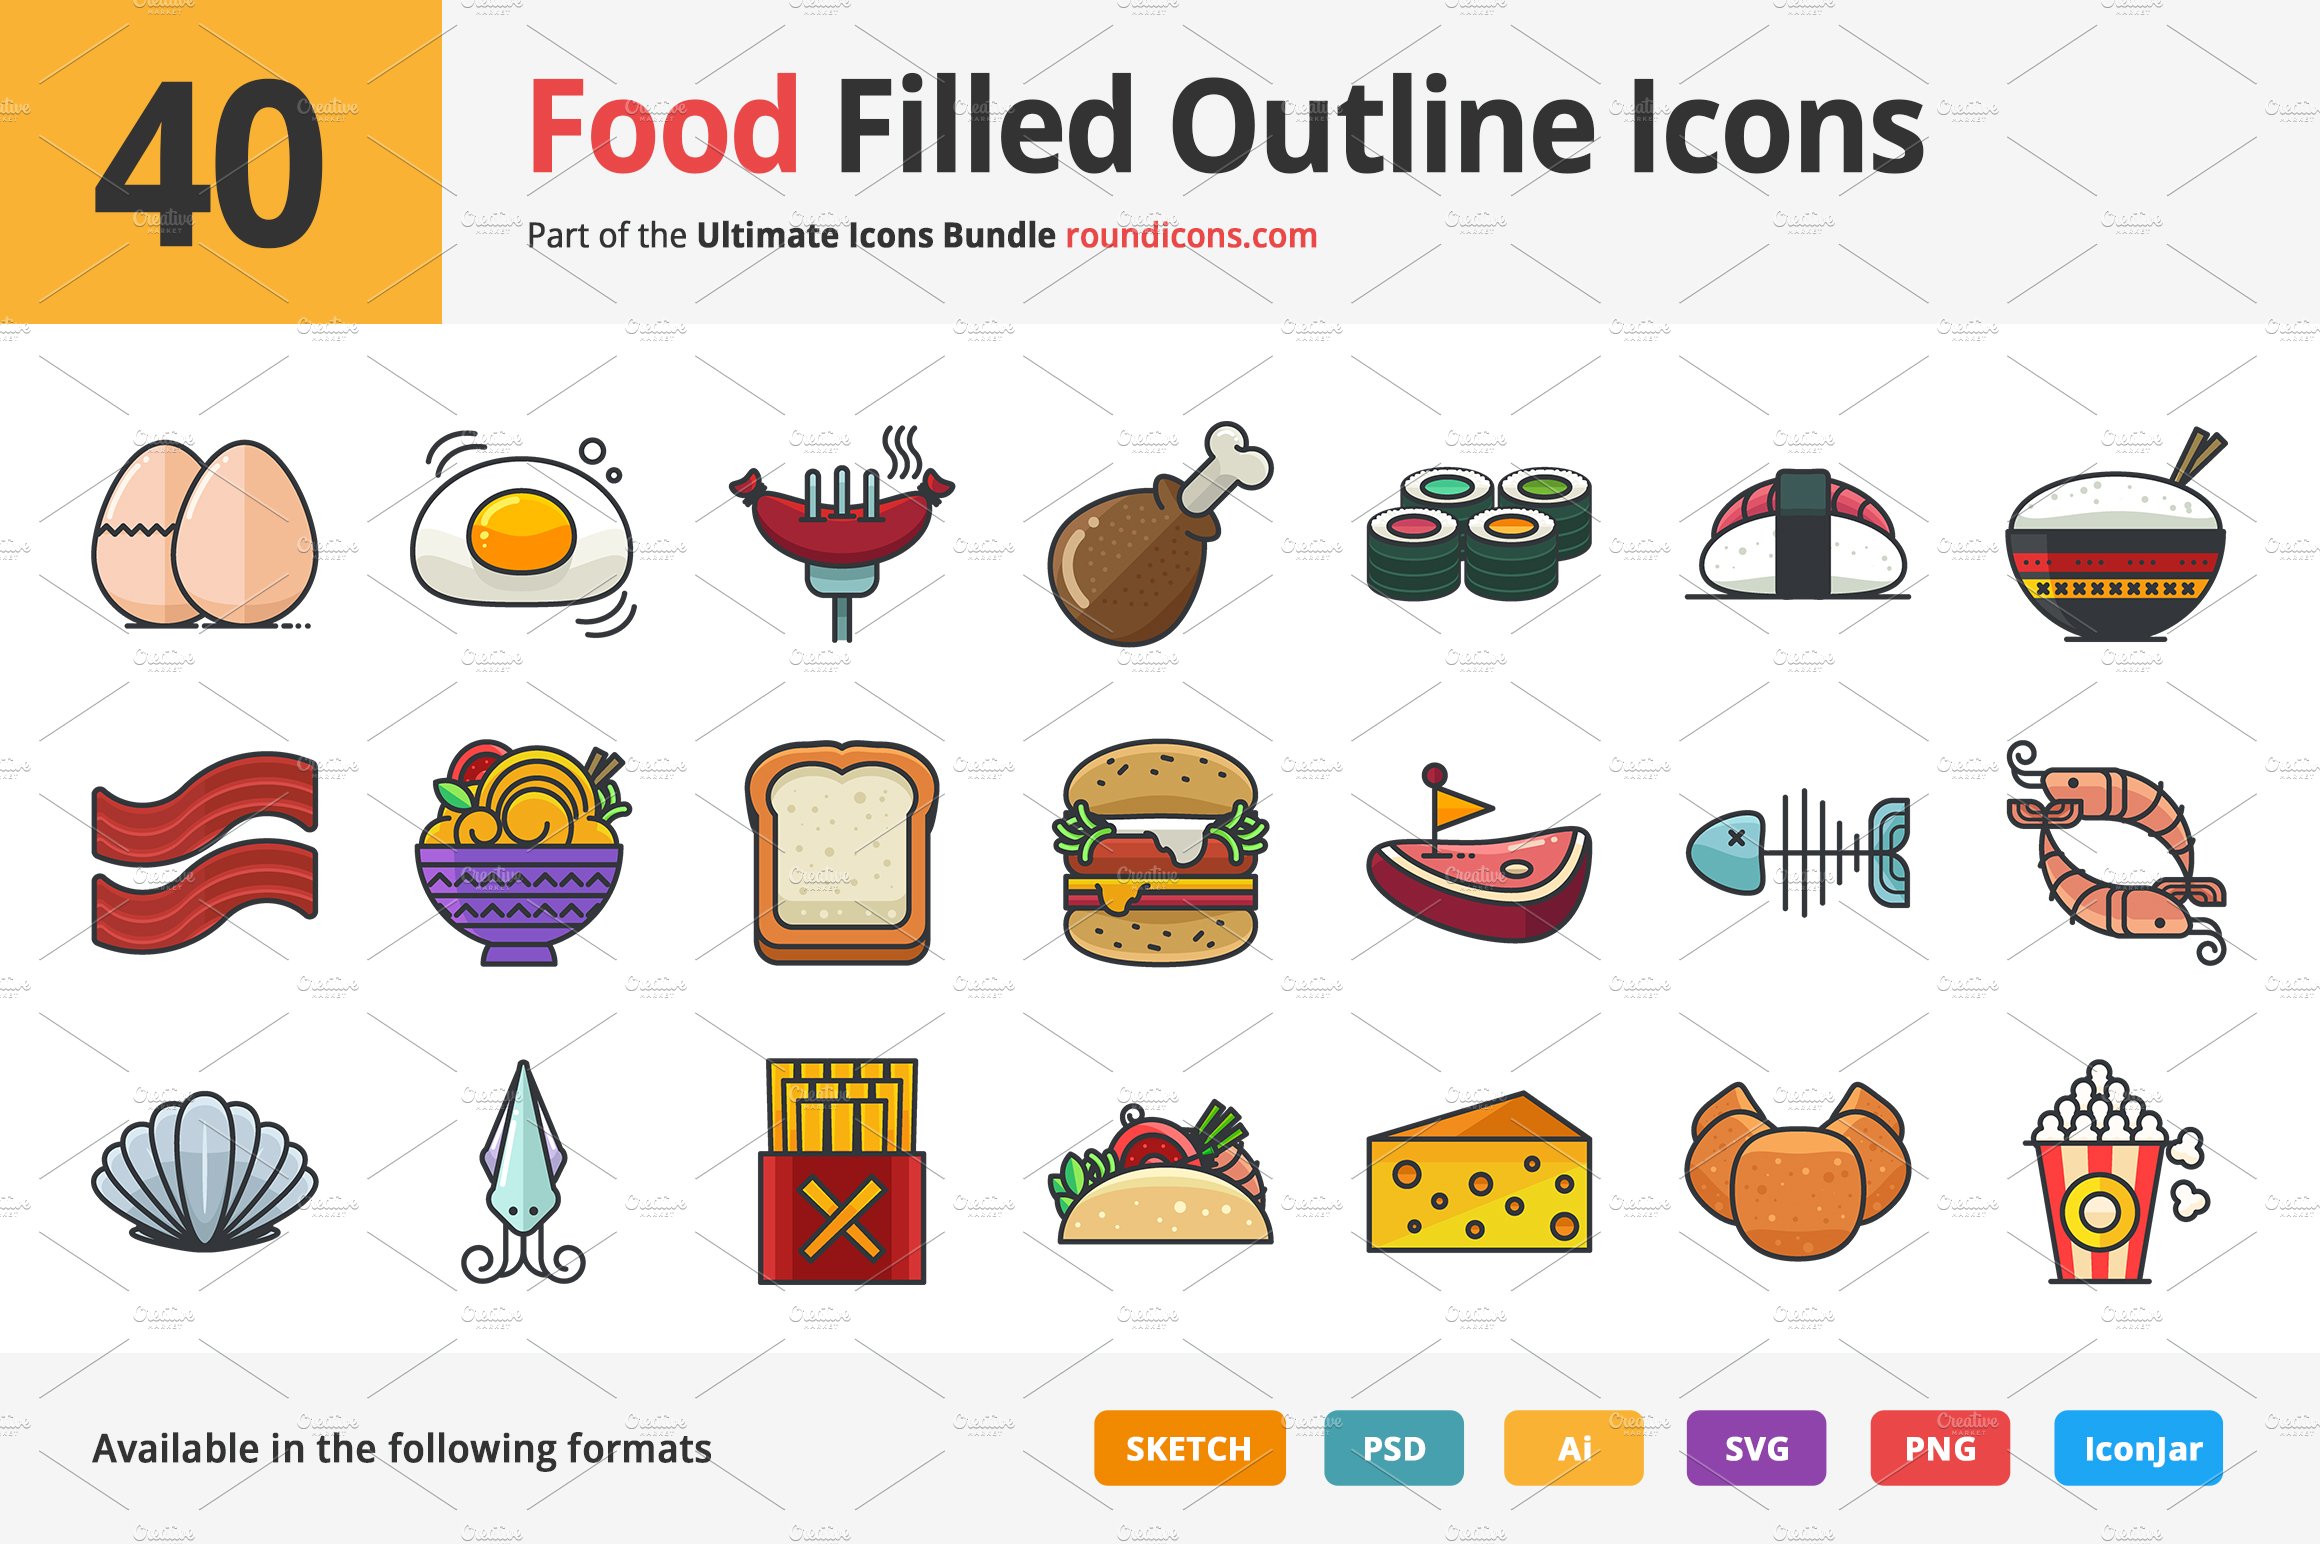 40 Food Filled Outline Icons cover image.